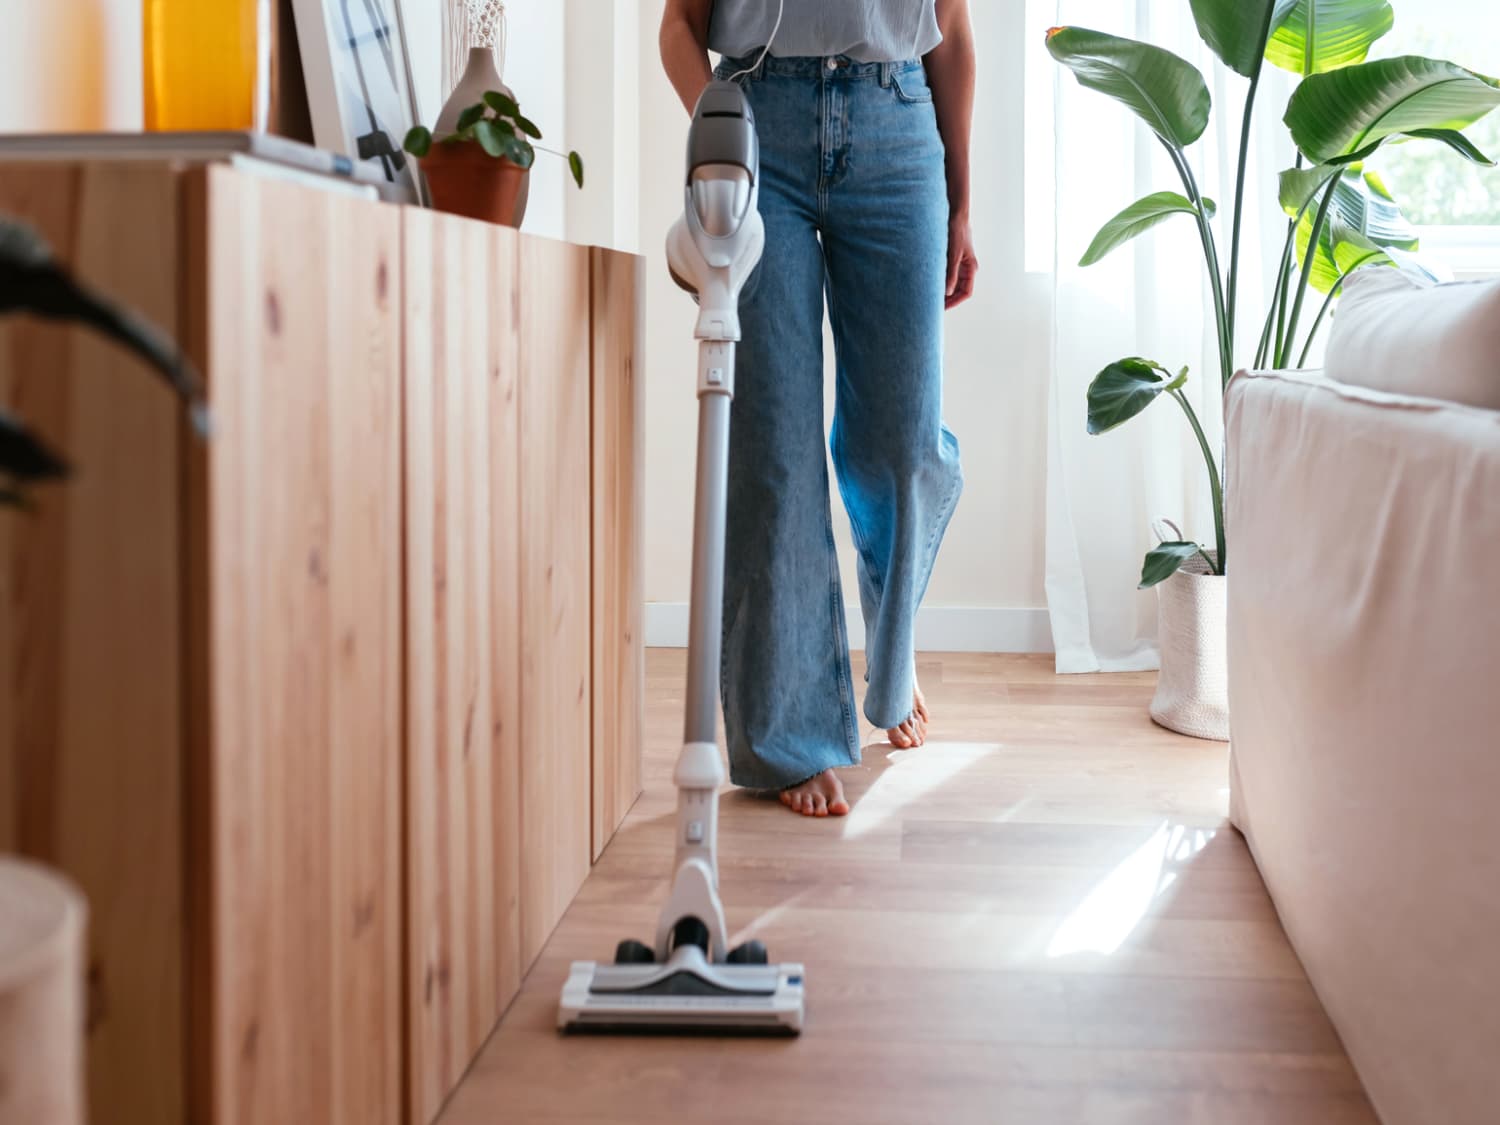 The 9 Best Laminate Floor Cleaners